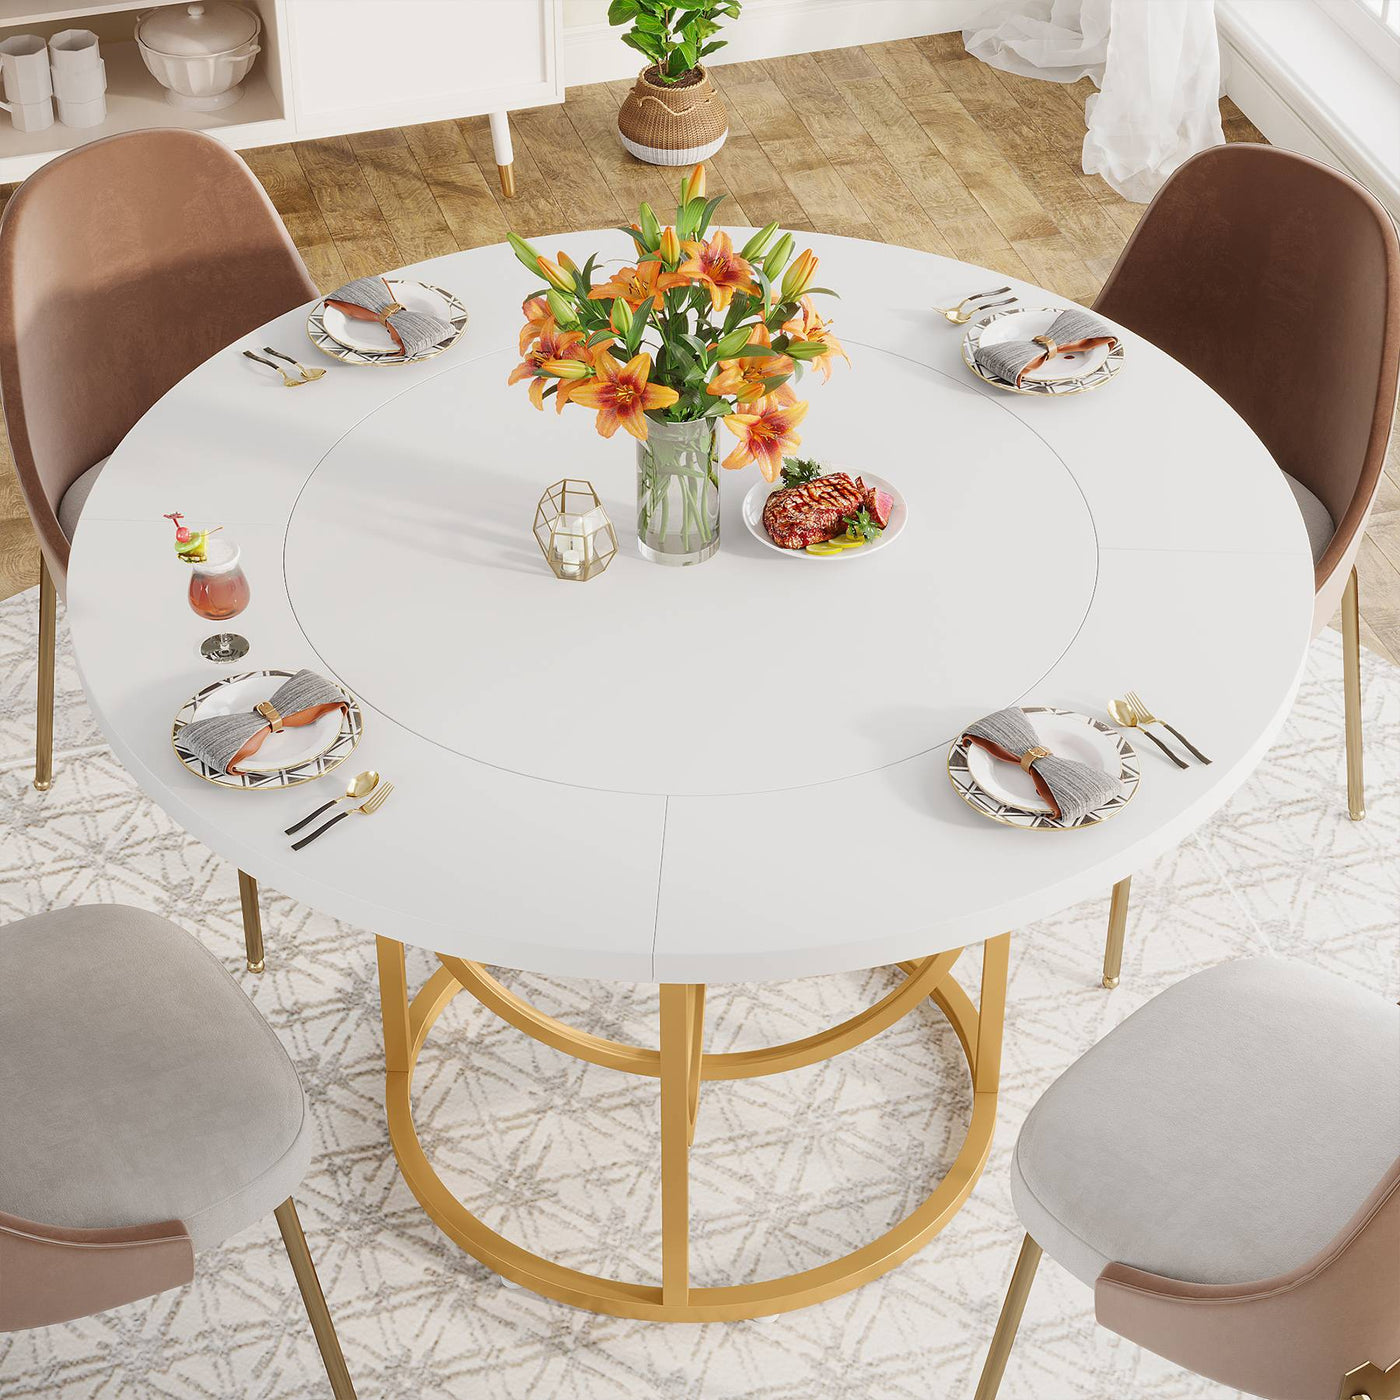 Hugh Round Dining Table | Wood Circular 47" Kitchen Dinner Table with Metal Base for 4